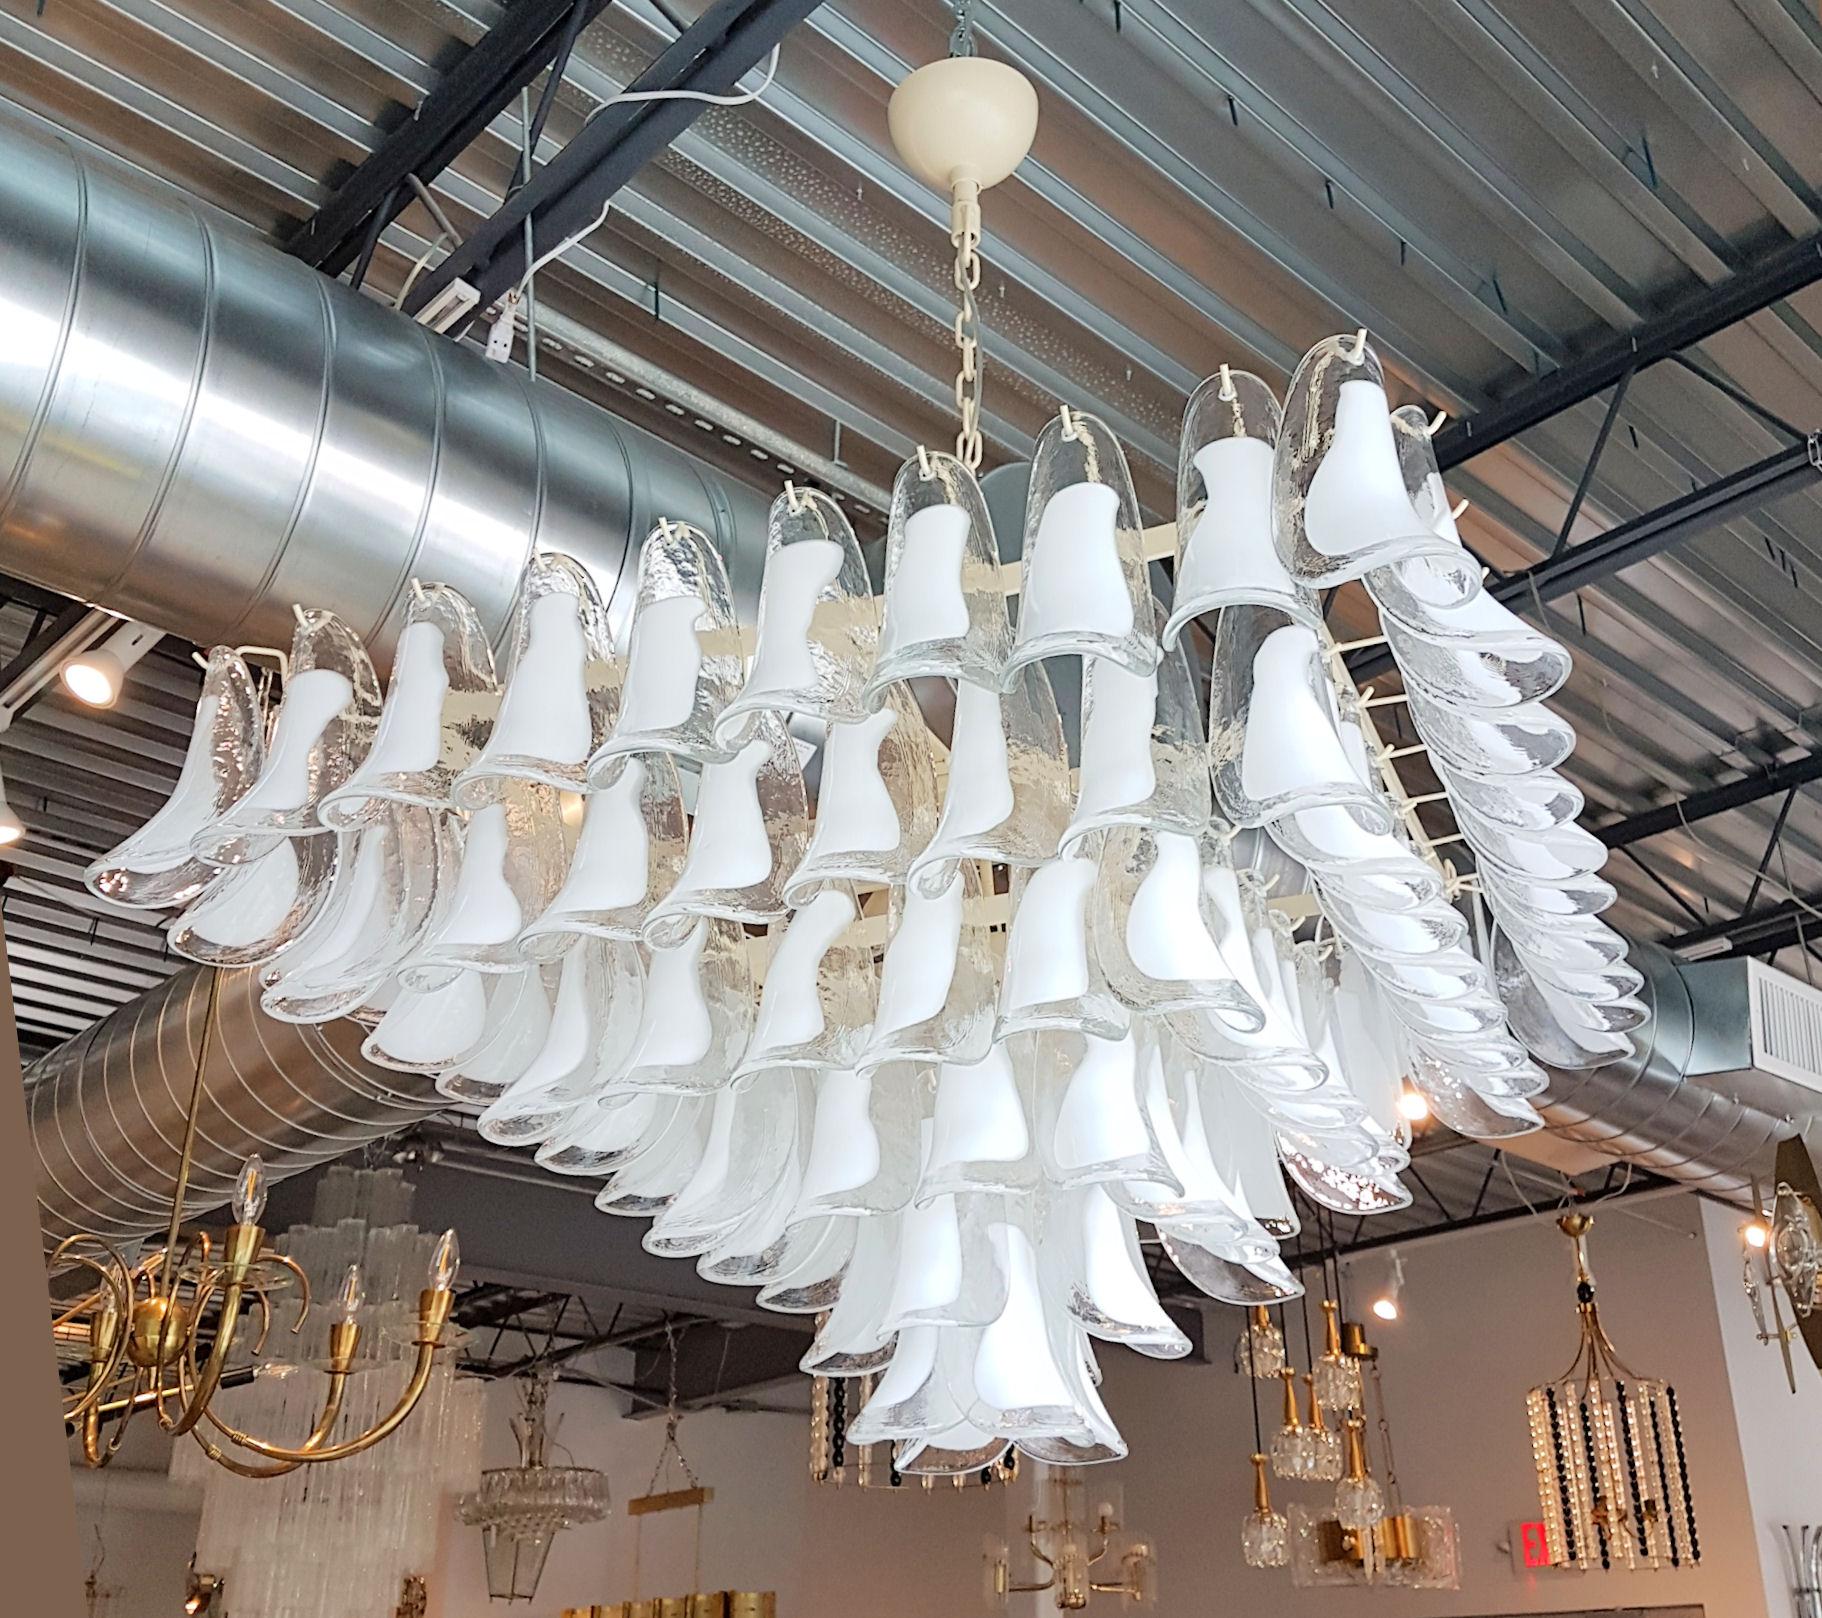 Mid-Century Modern white and clear Murano glass petals chandelier with a square and pyramidal shape.
By Mazzega, Italy, 1970s.
6-tiers Murano chandelier.
8 medium base lights, rewired for US.
Ivory metal frame, chain and canopy.
The white and